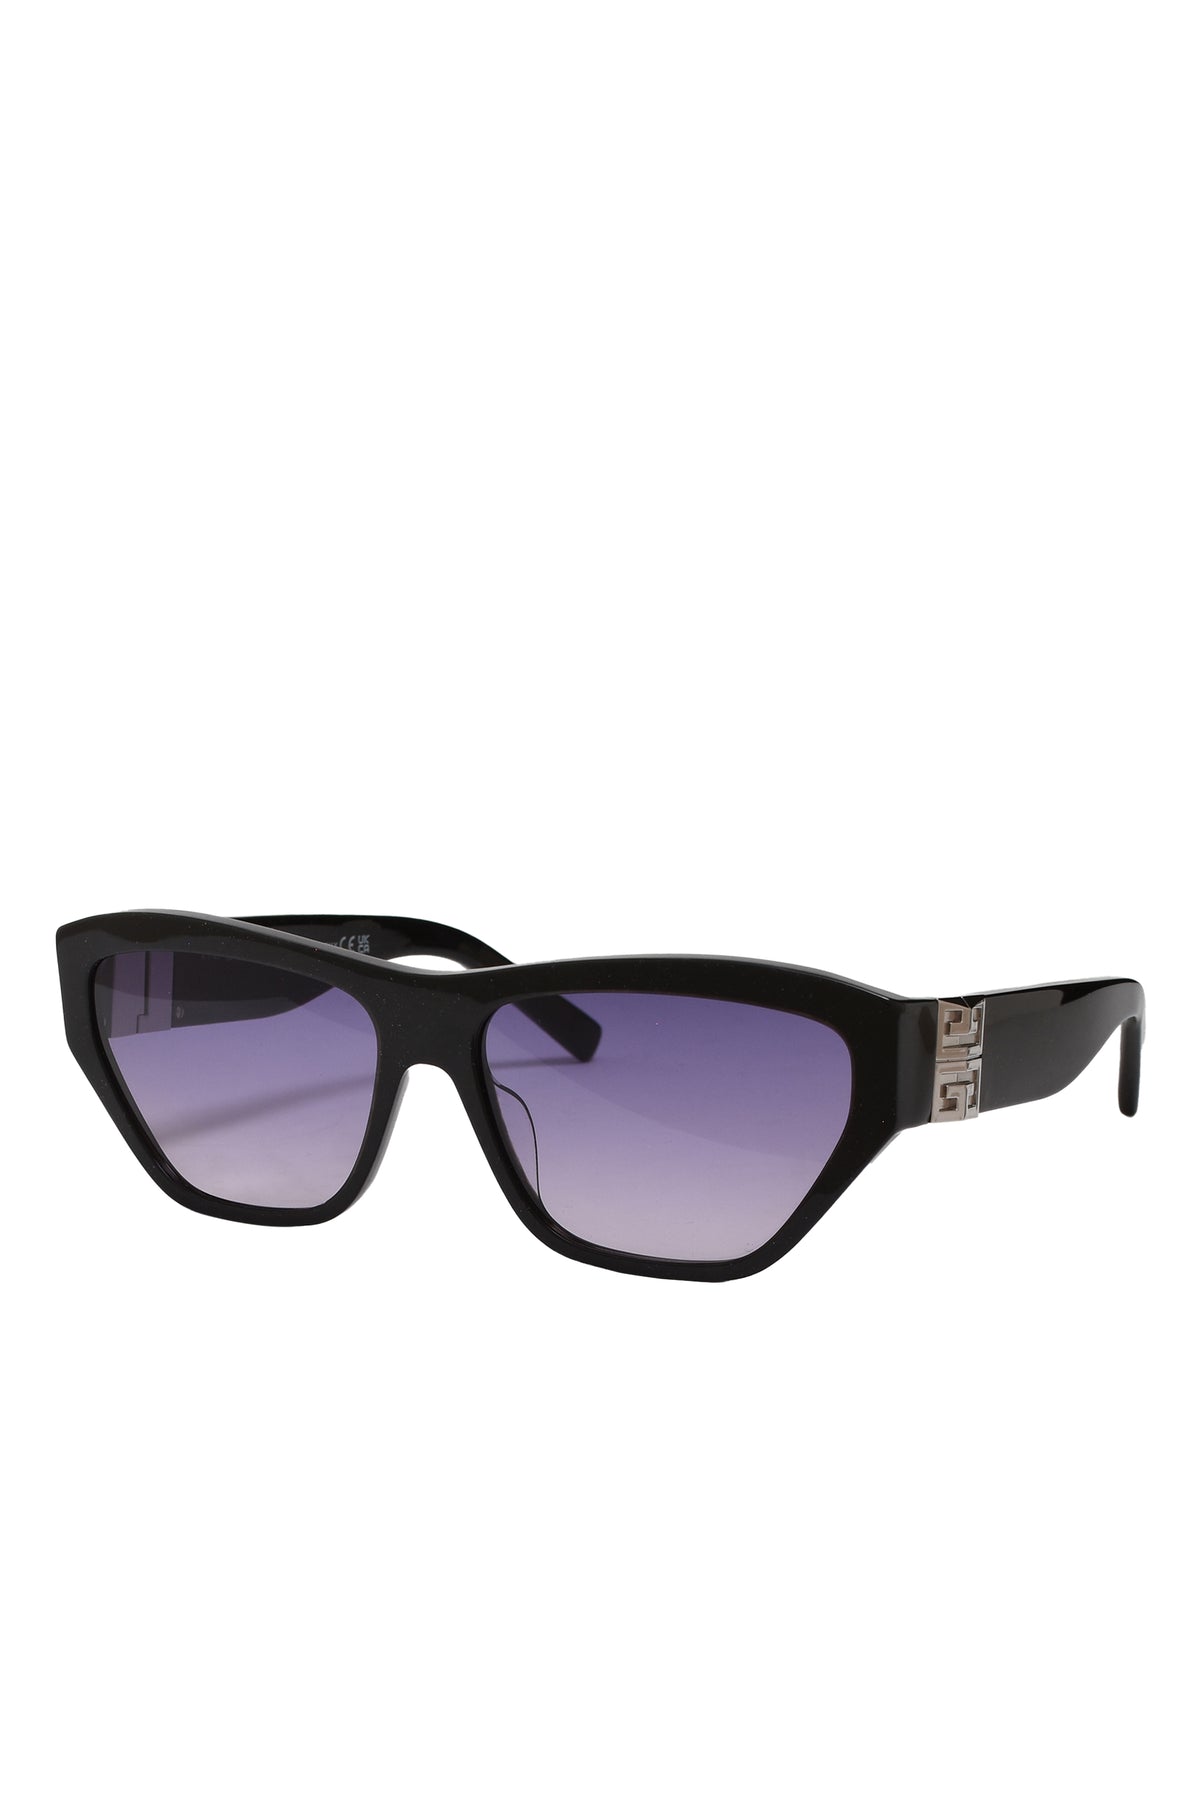 GIVENCHY SUNGLASSES/BLK/OTHER/GRADIENT OR MIRROR VIOLET